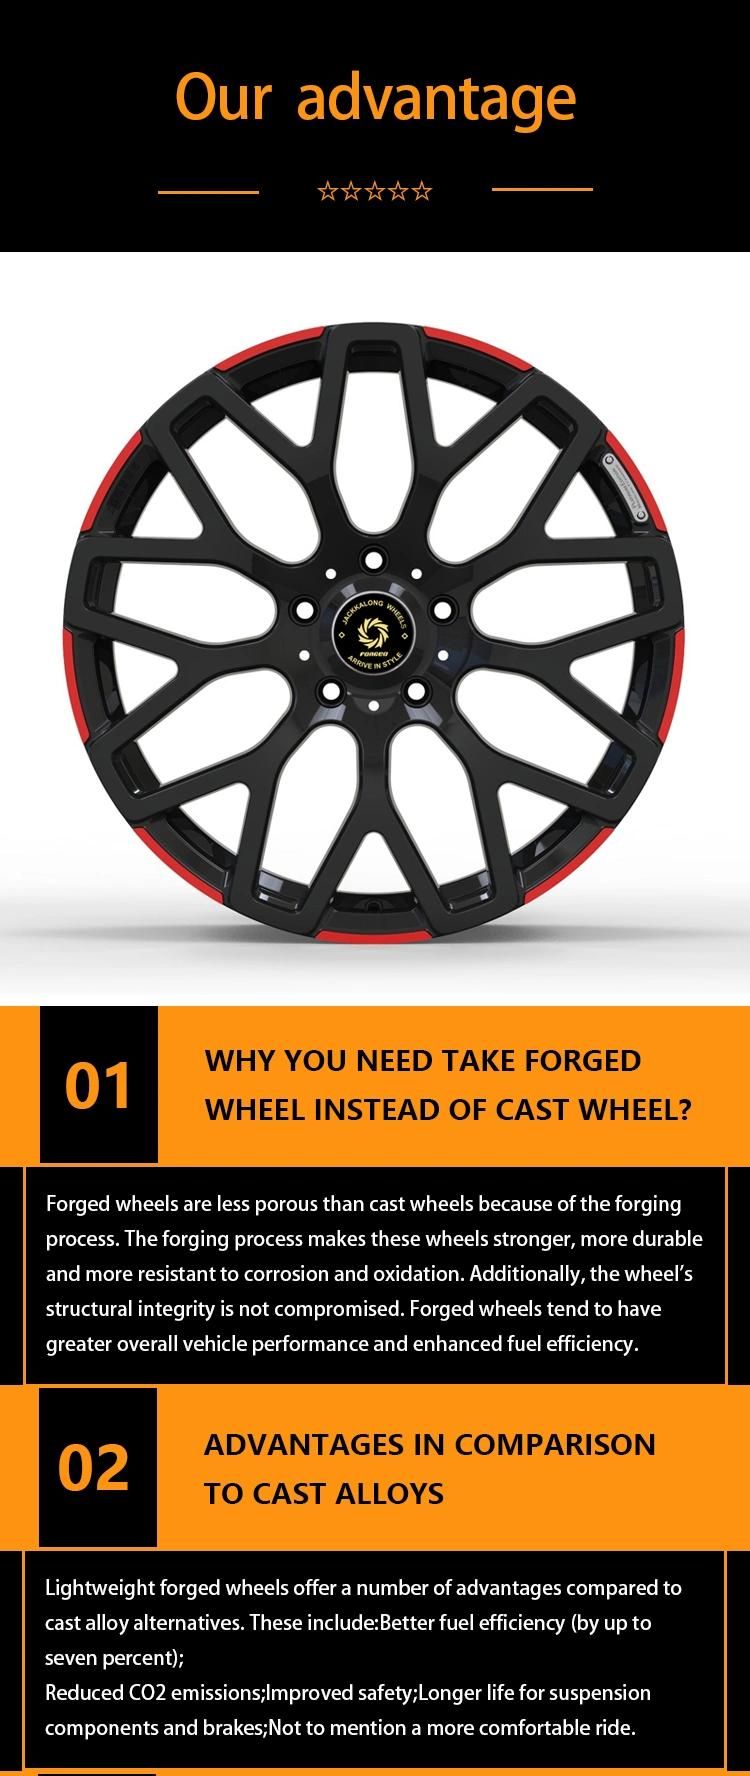 1 Piece Forged T6061 Alloy Rims Sport Aluminum Wheels for Customized T6061 Material with Mag Rims with Black Machined Lip+Milling Engravings for Jaguar